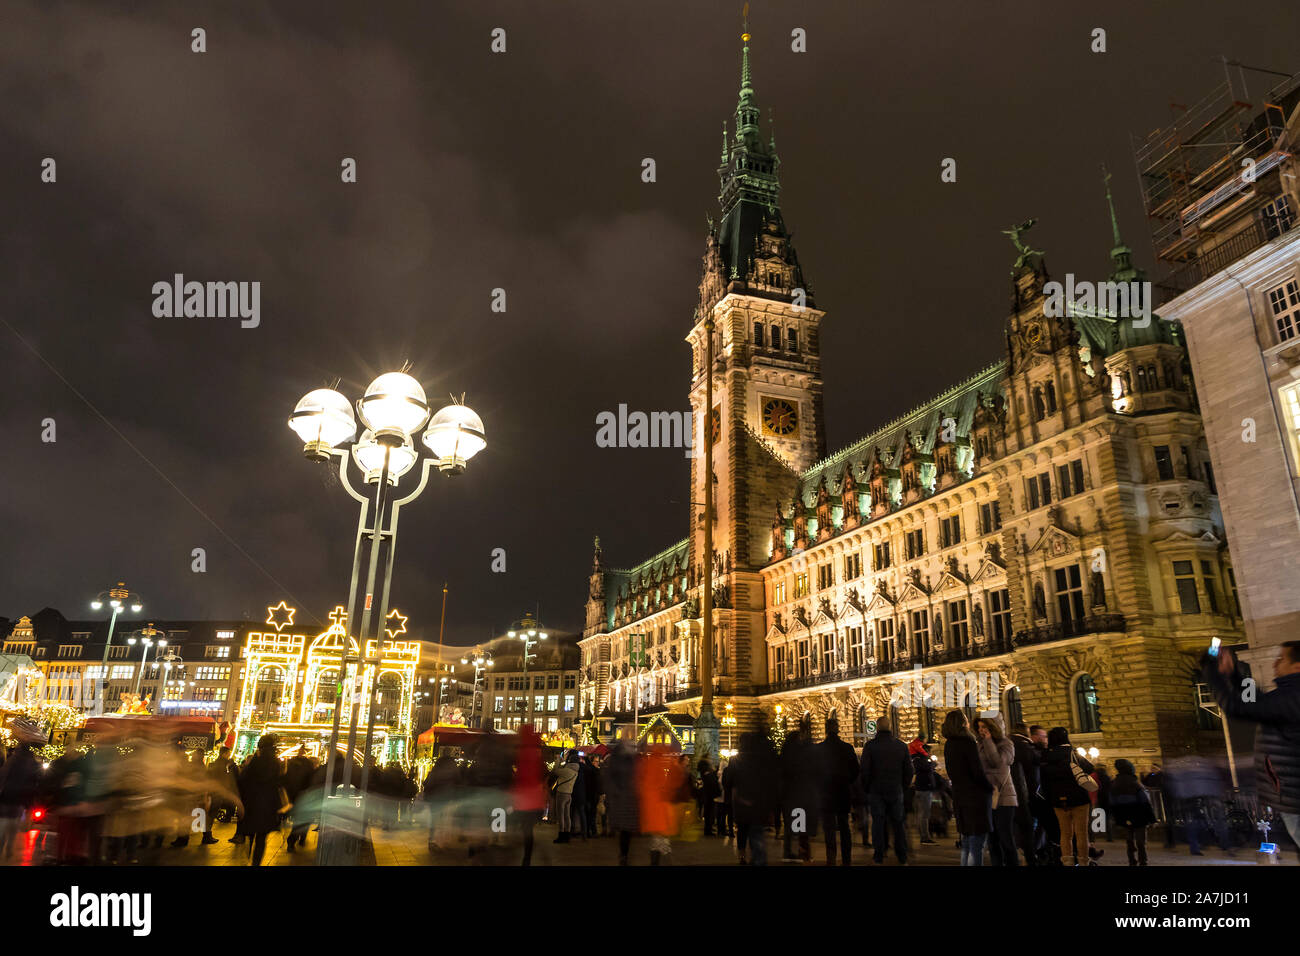 Hamburg, Germany - December 14, 2018: Christmas market (Weihnachtsmarkt) at Town Hall square in front of Hamburg Town Hall. The most popular and most Stock Photo